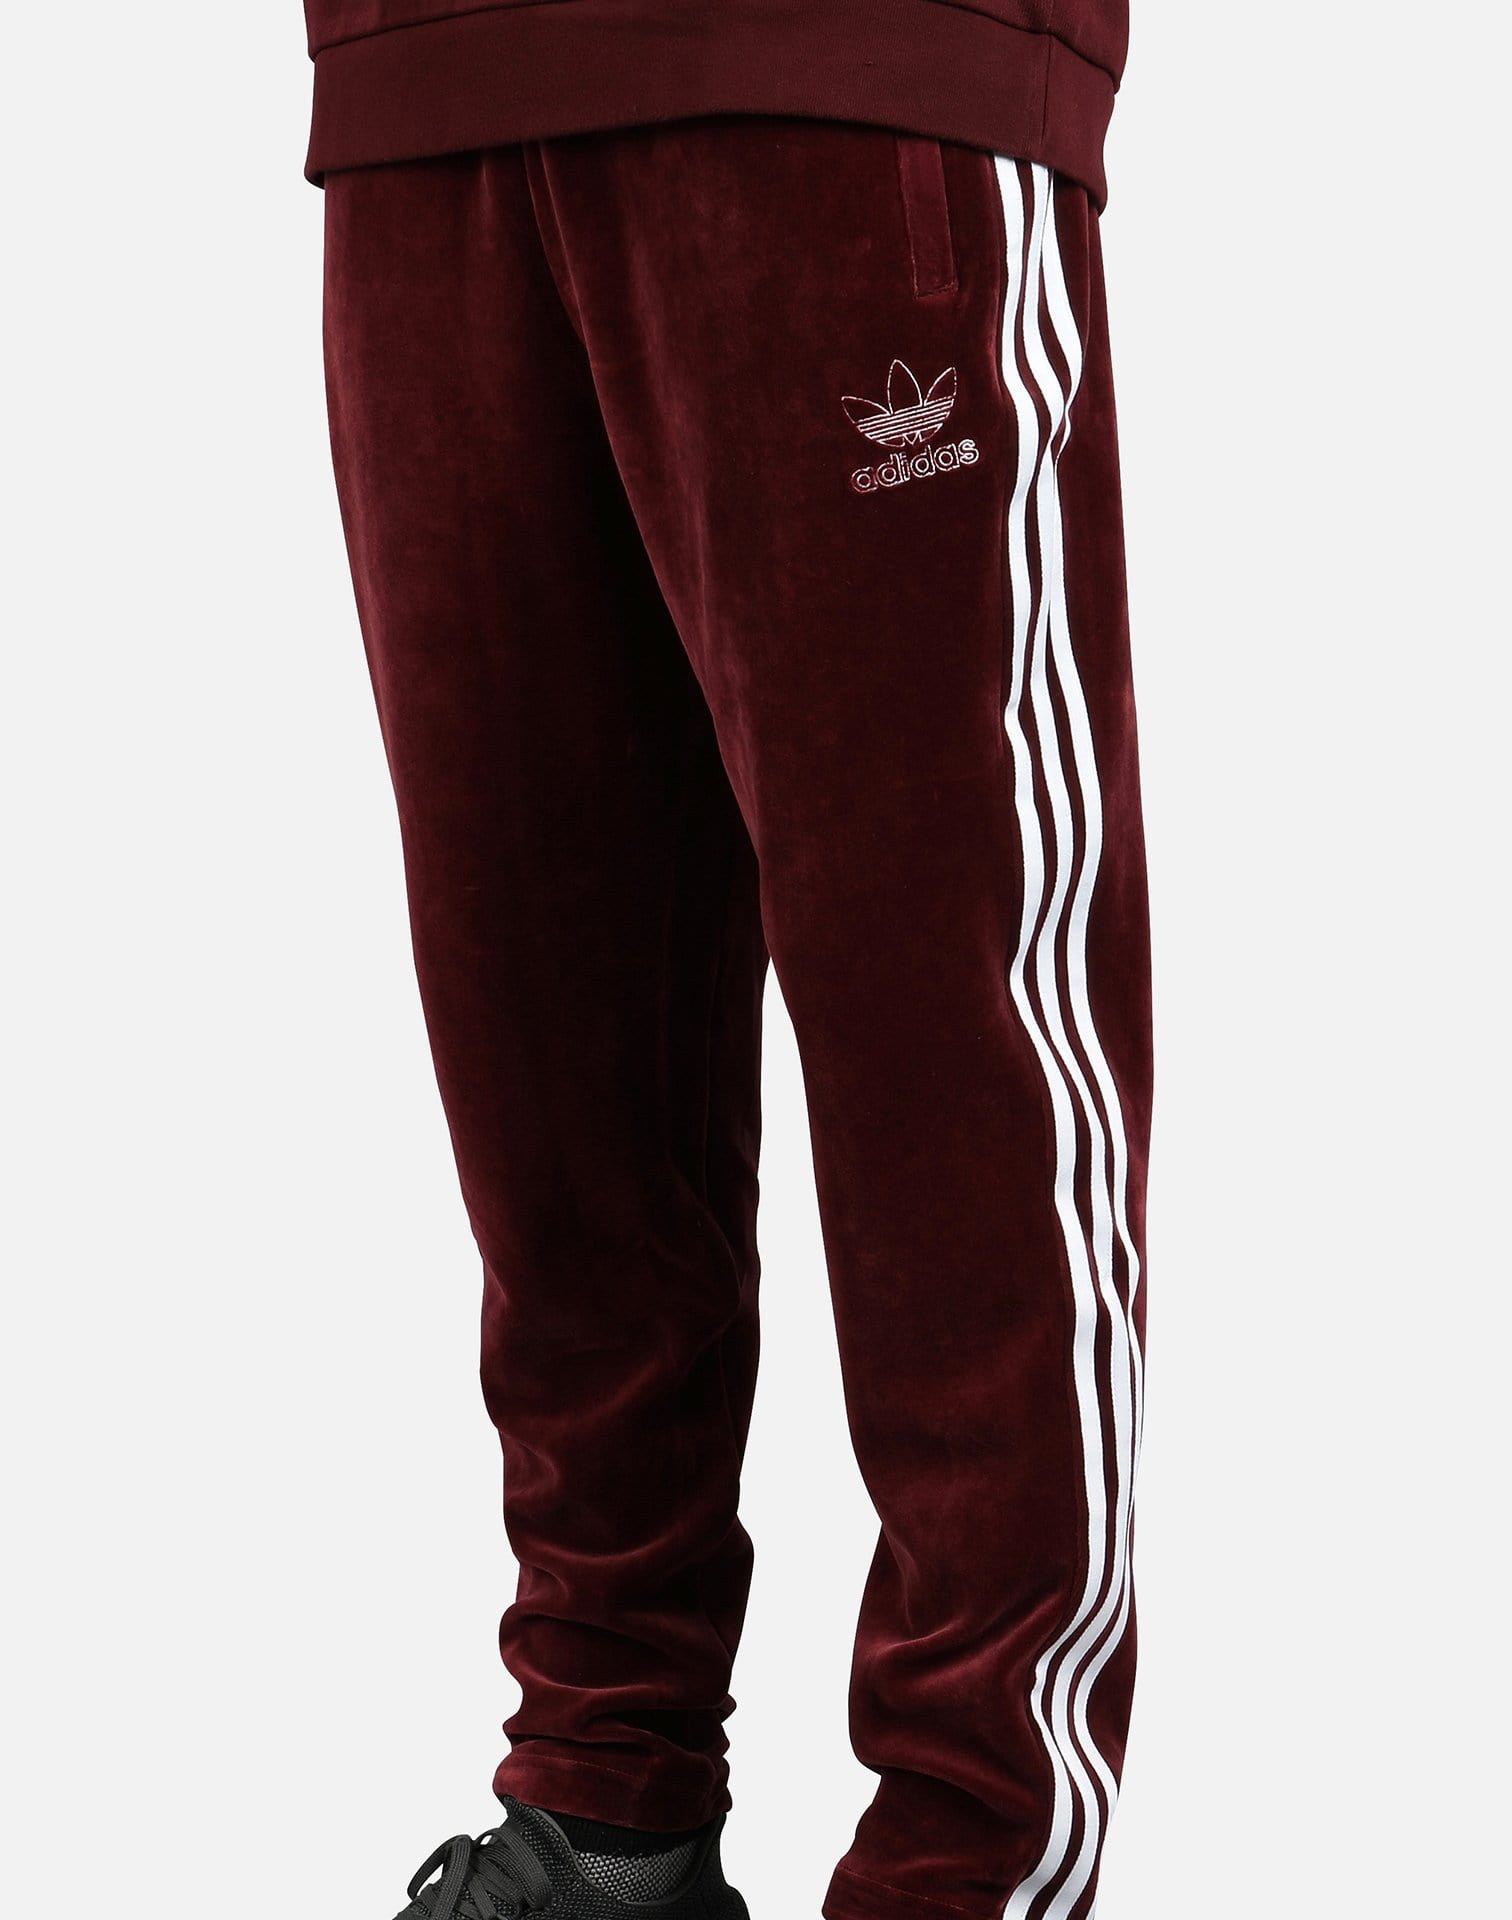 adidas Beckenbauer Maroon Velour Track Pants  Urban Outfitters UK